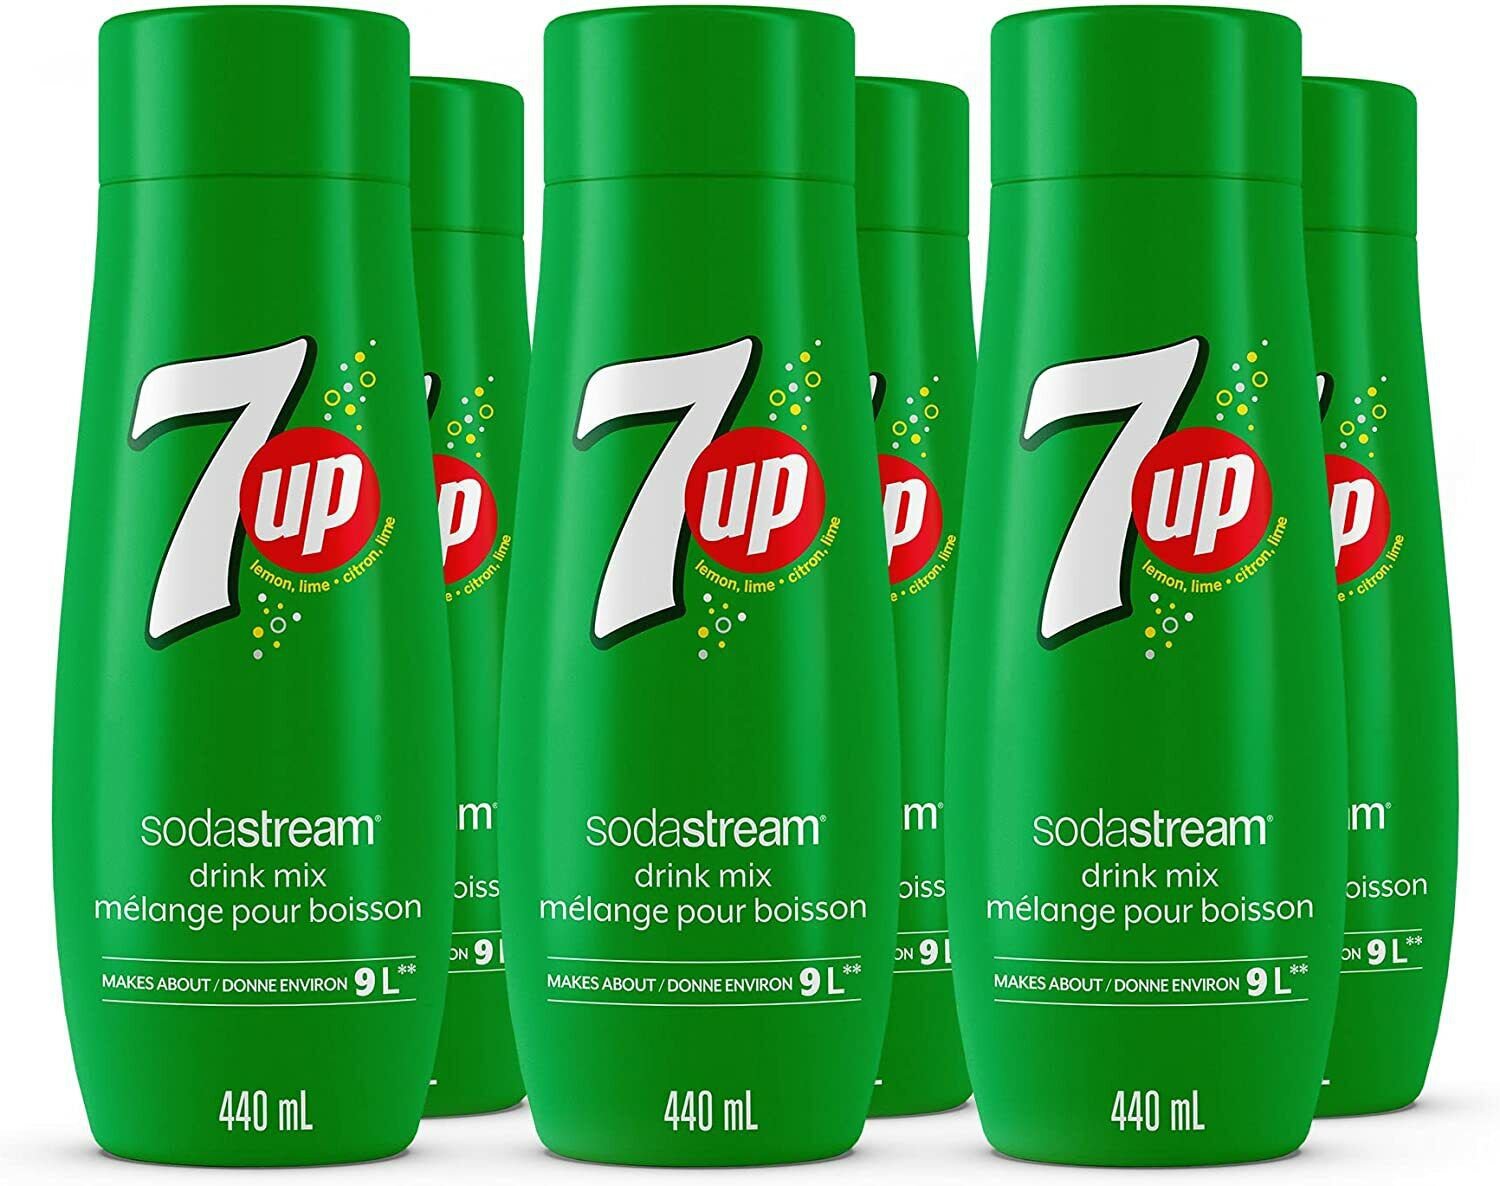 Sodastream   7up  for SodaStream 440mL x 6 (Makes 54L) From Canada